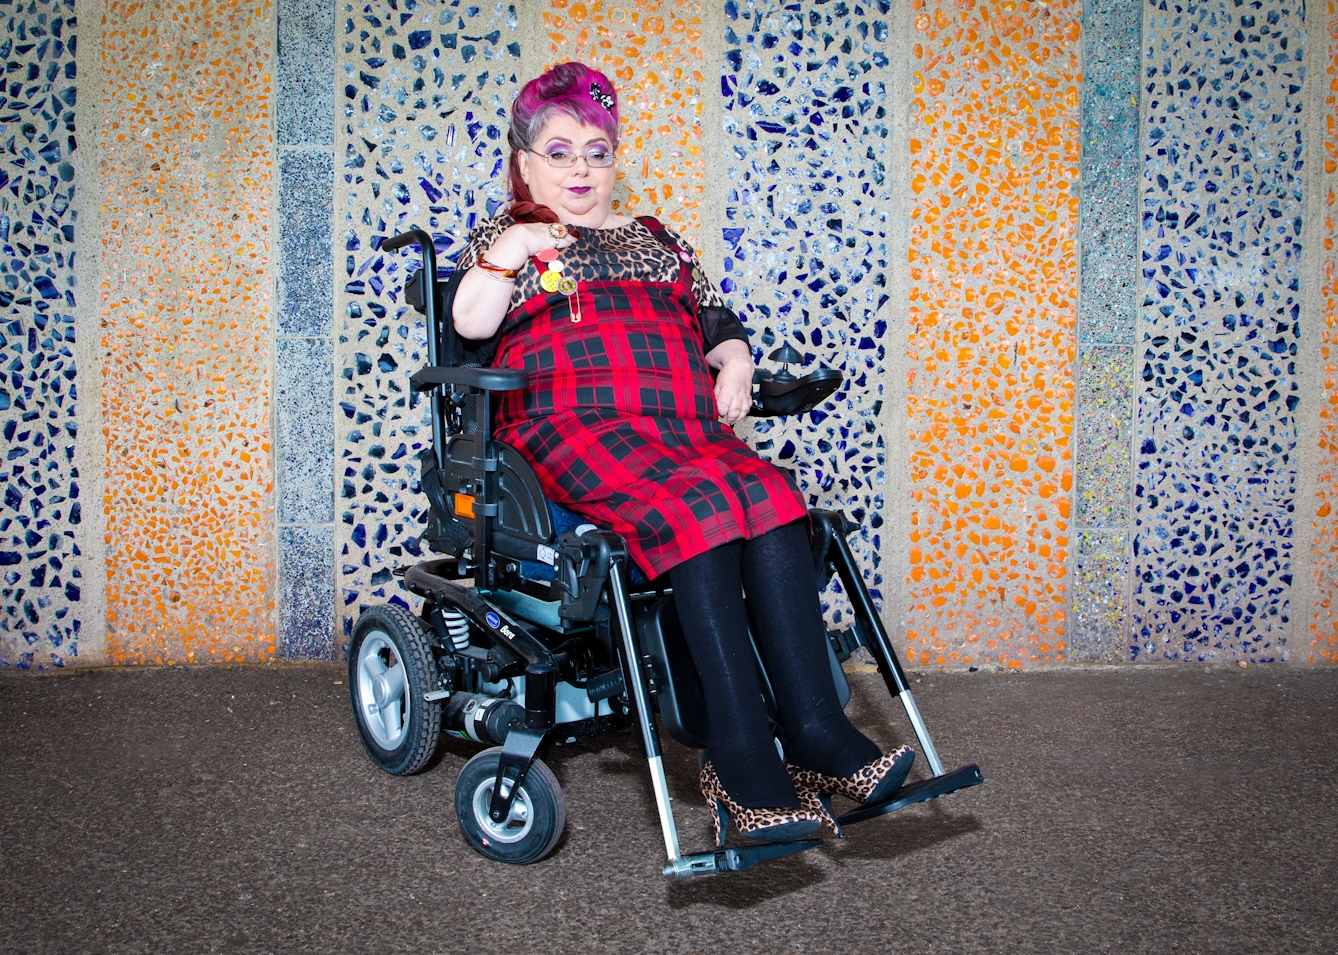 Photograph of a woman wearing a red tartan dress seated in a wheelchair, against a coloured mosaic patterned background.